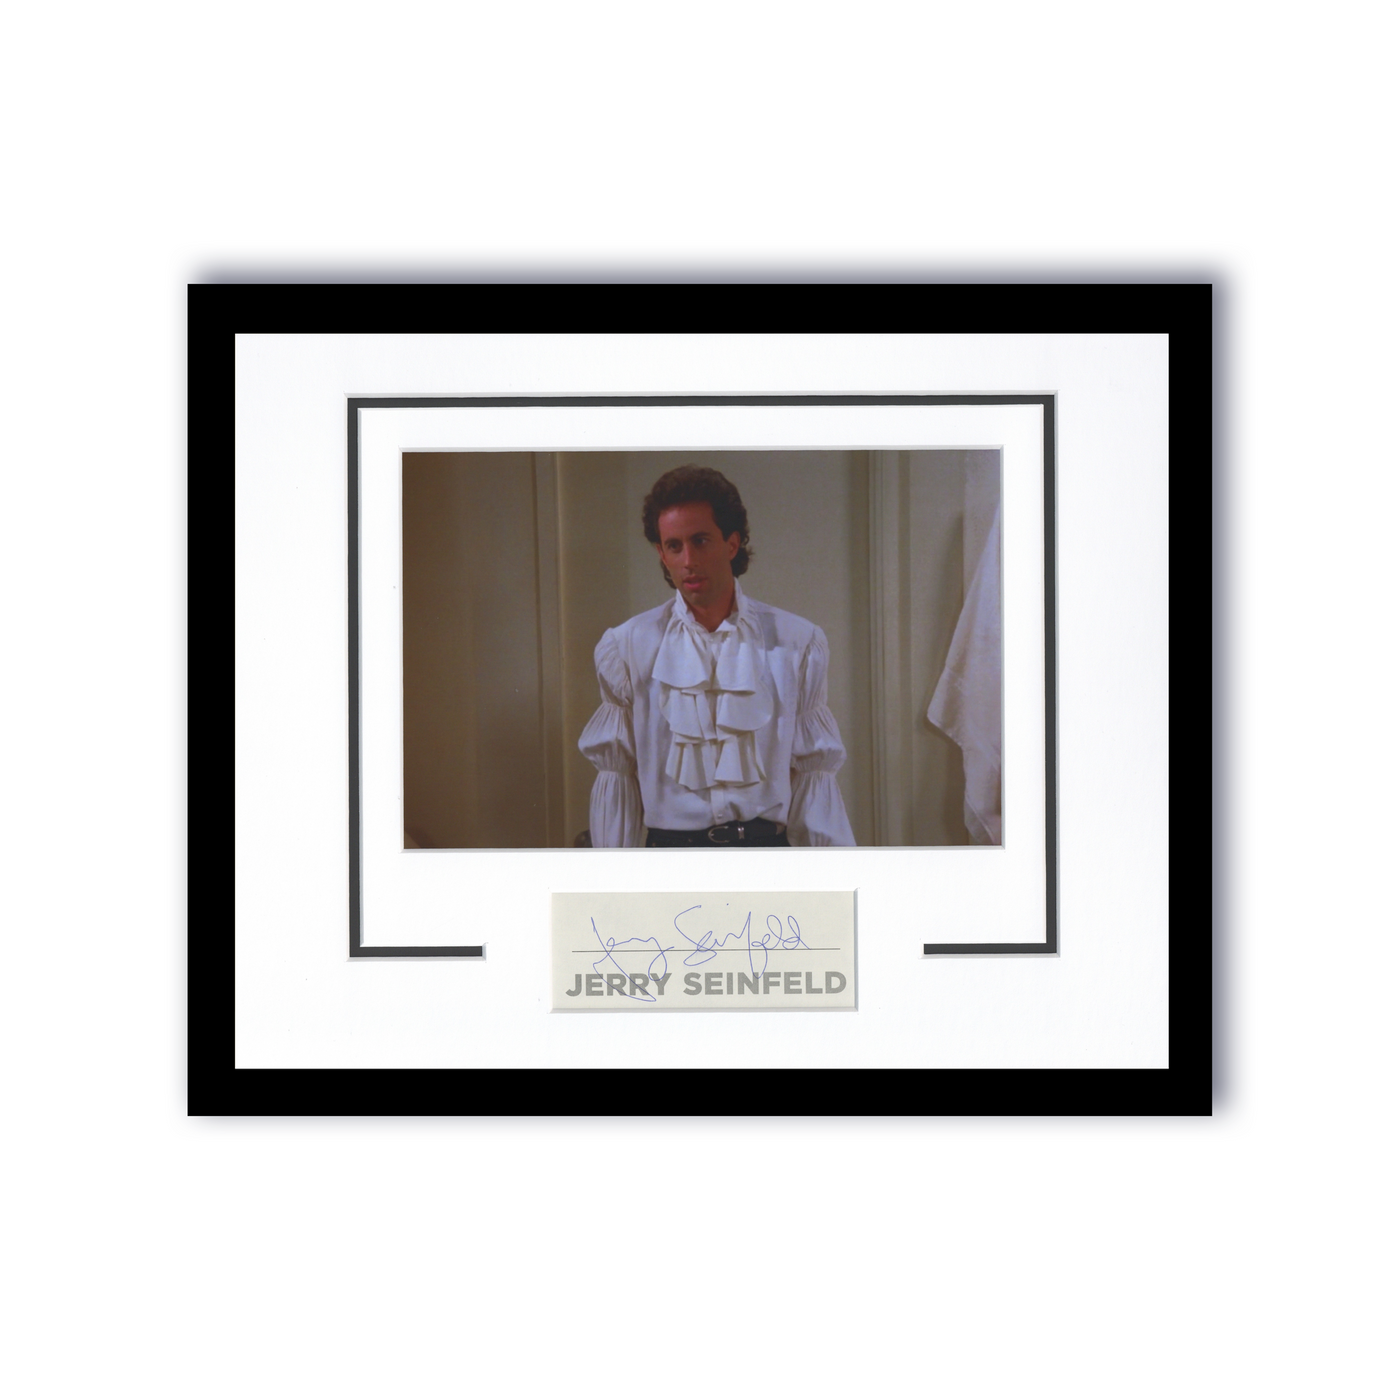 Jerry Seinfeld Autographed Signed 11x14 Framed Photo The Puffy Shirt ACOA